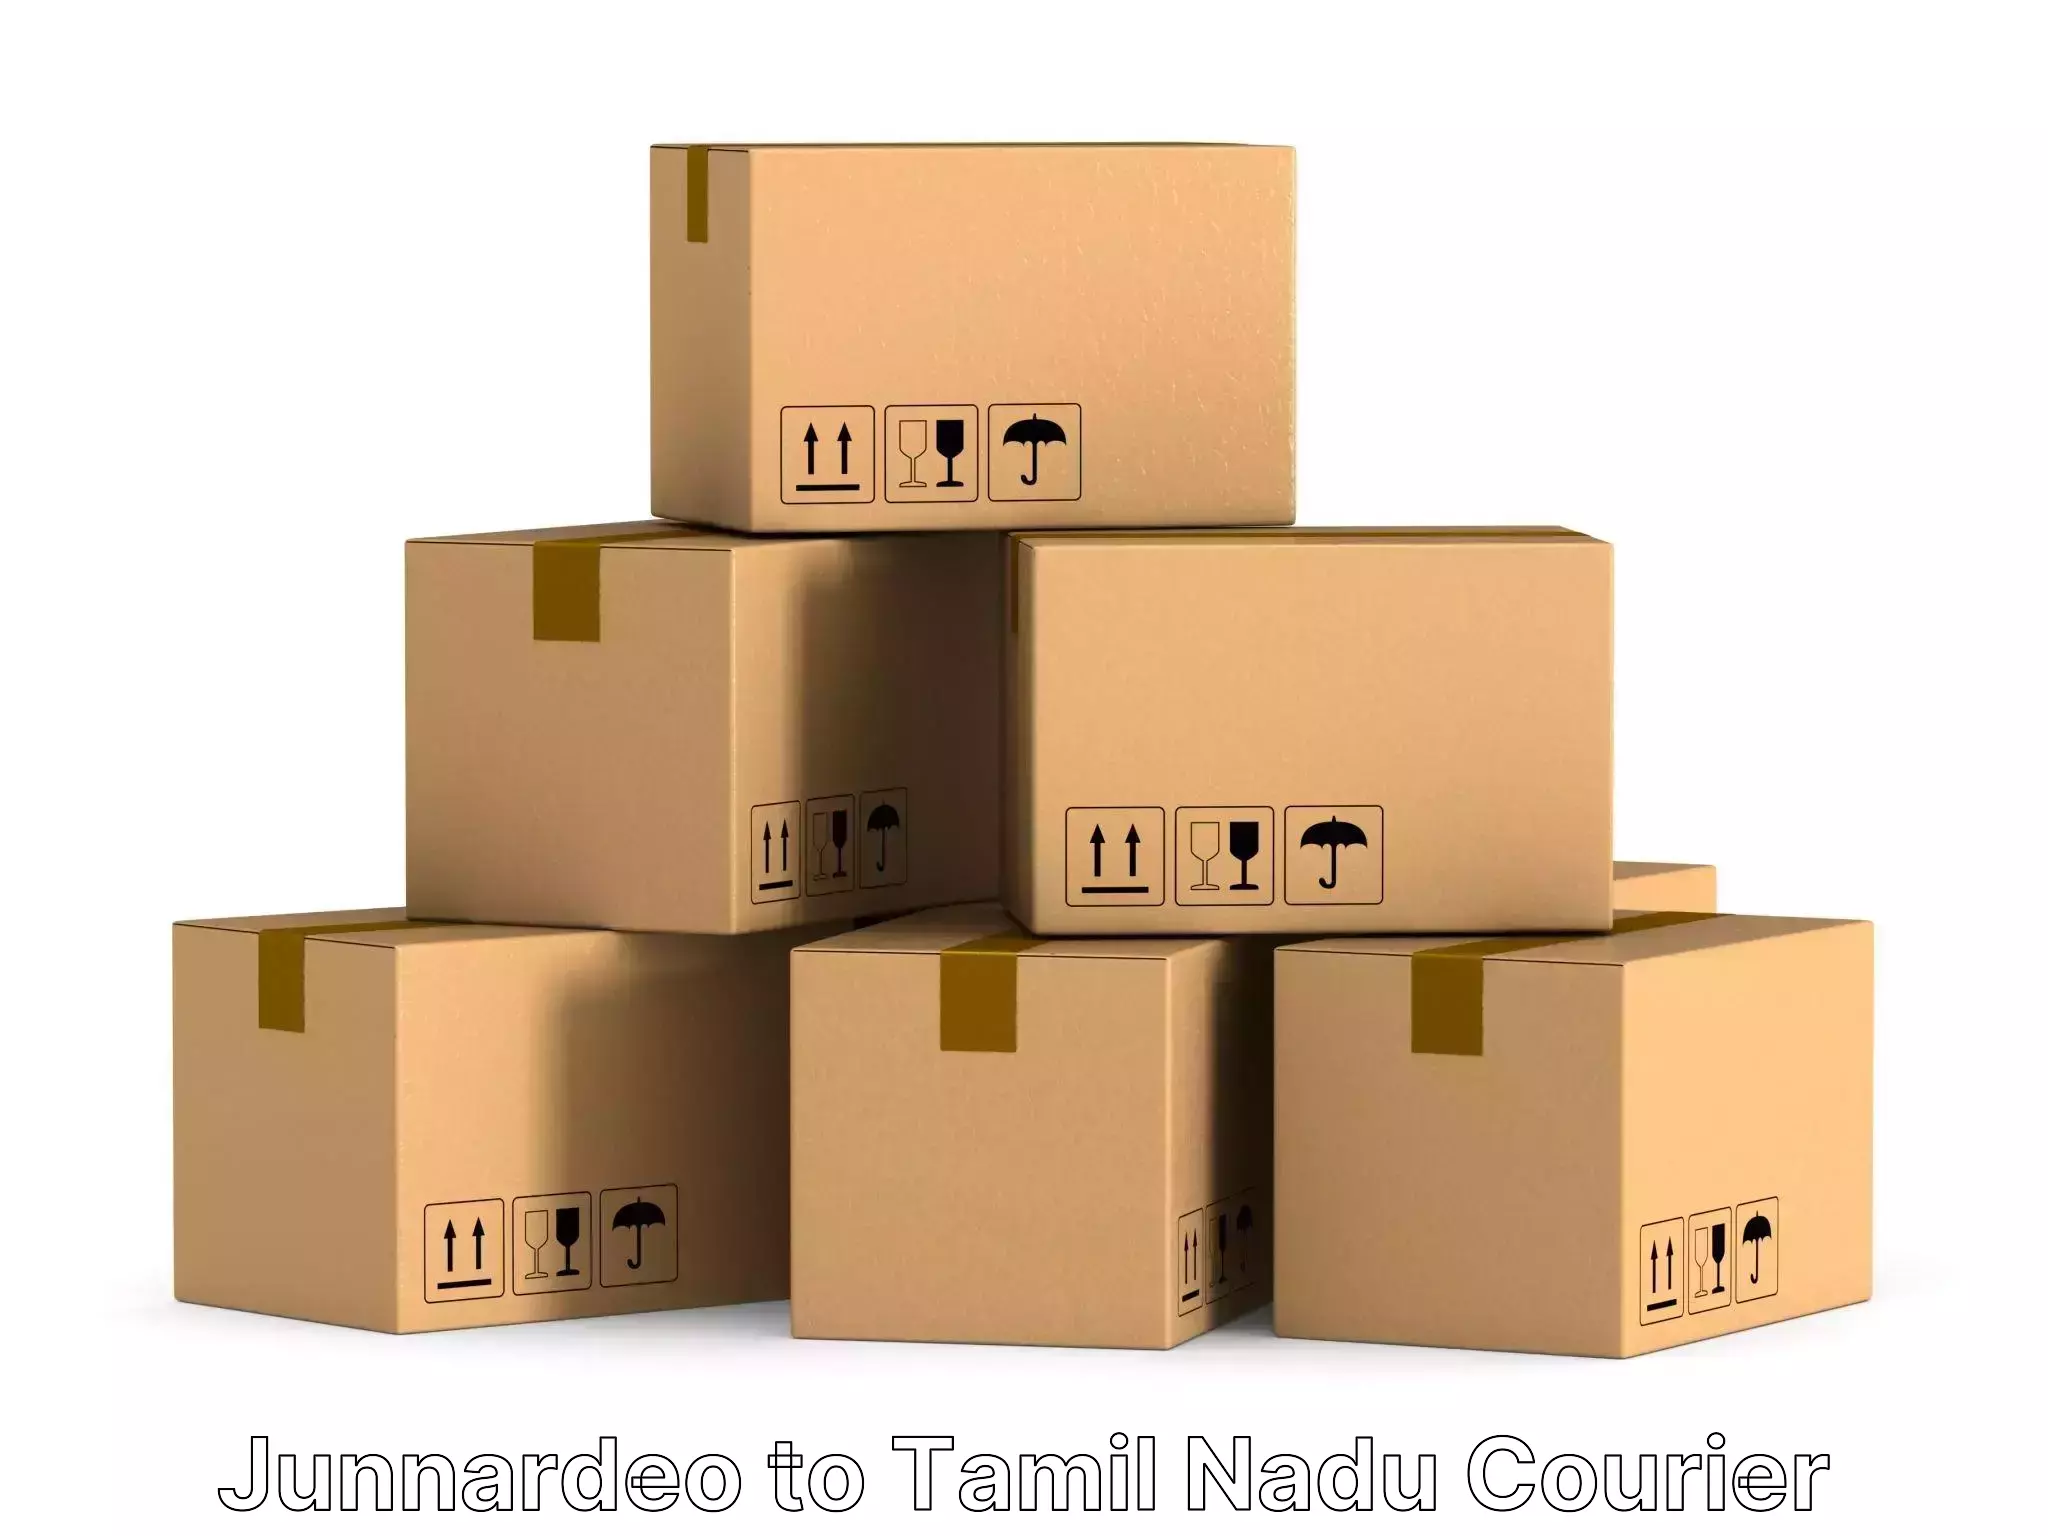 Home moving experts Junnardeo to Tamil Nadu